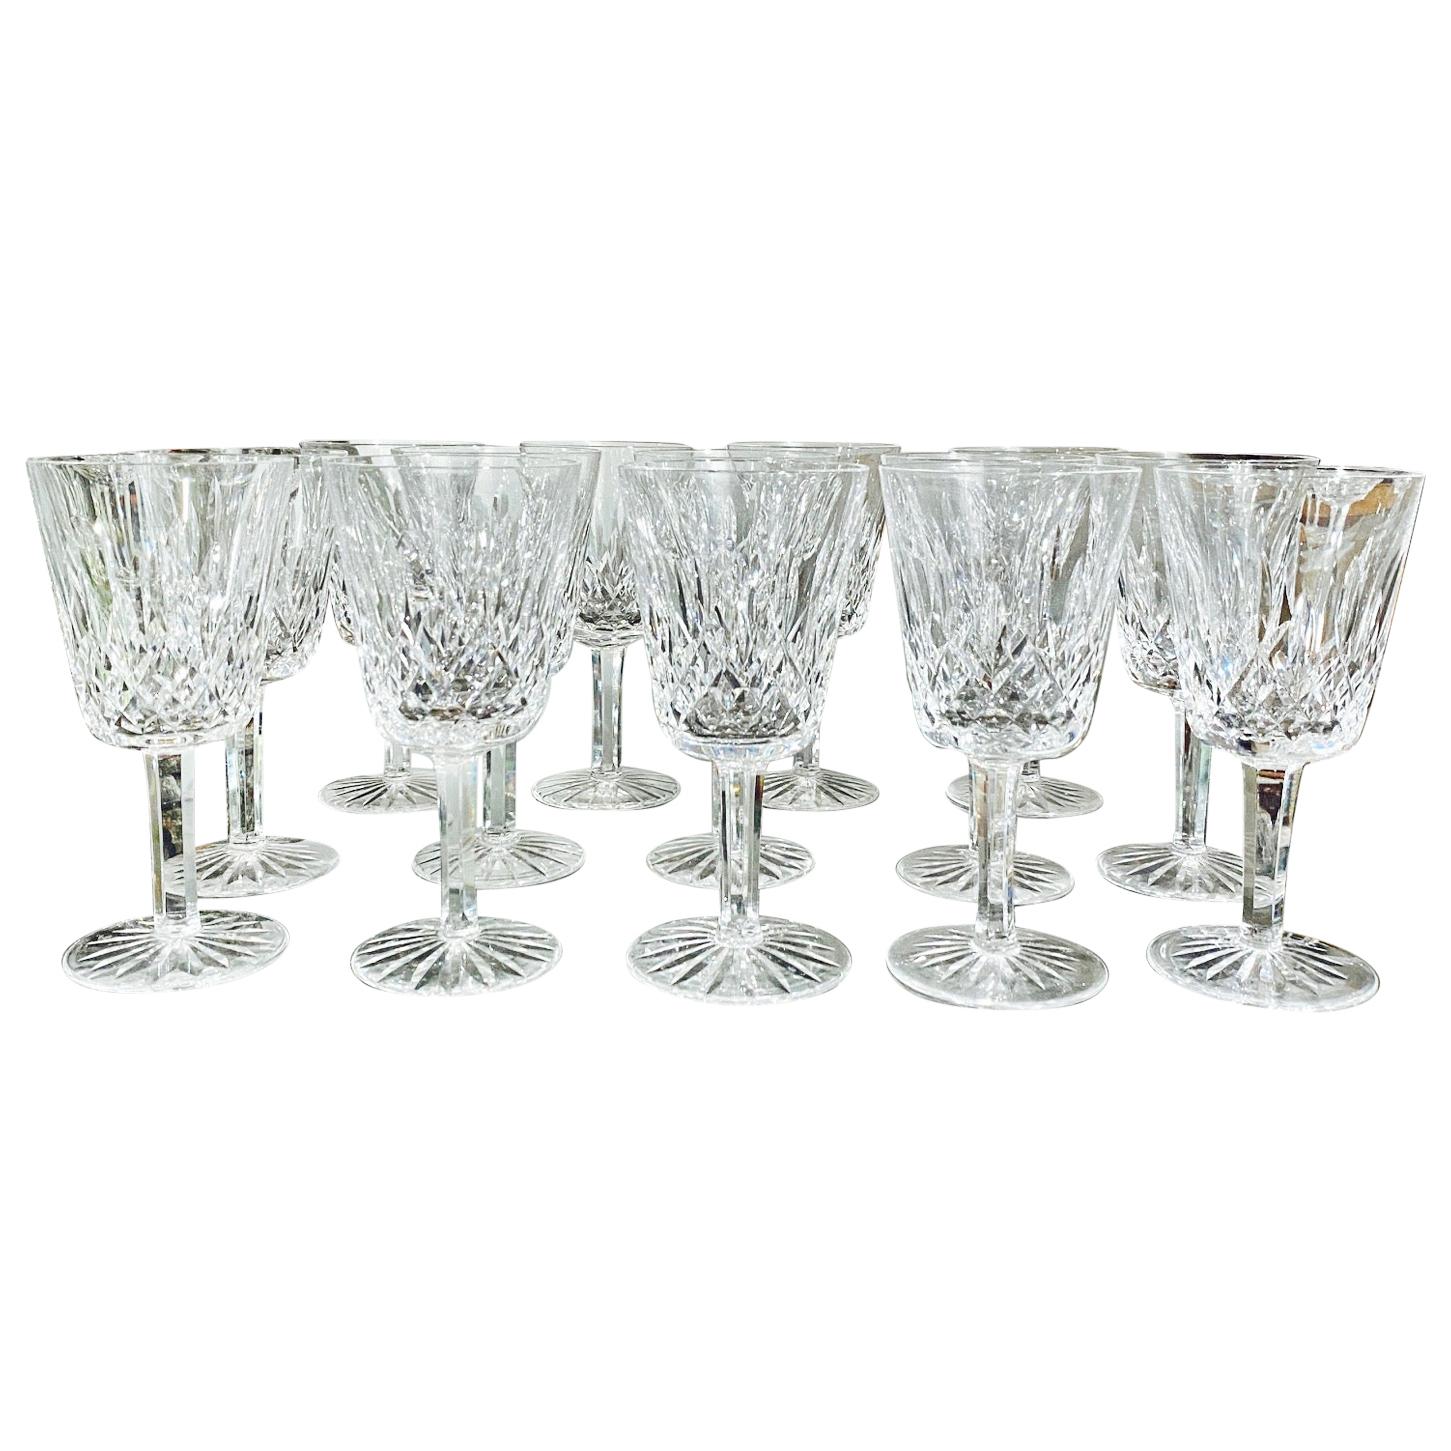 Set of 14 Vintage Waterford Crystal Lismore Water Goblets, Germany, circa 1990s